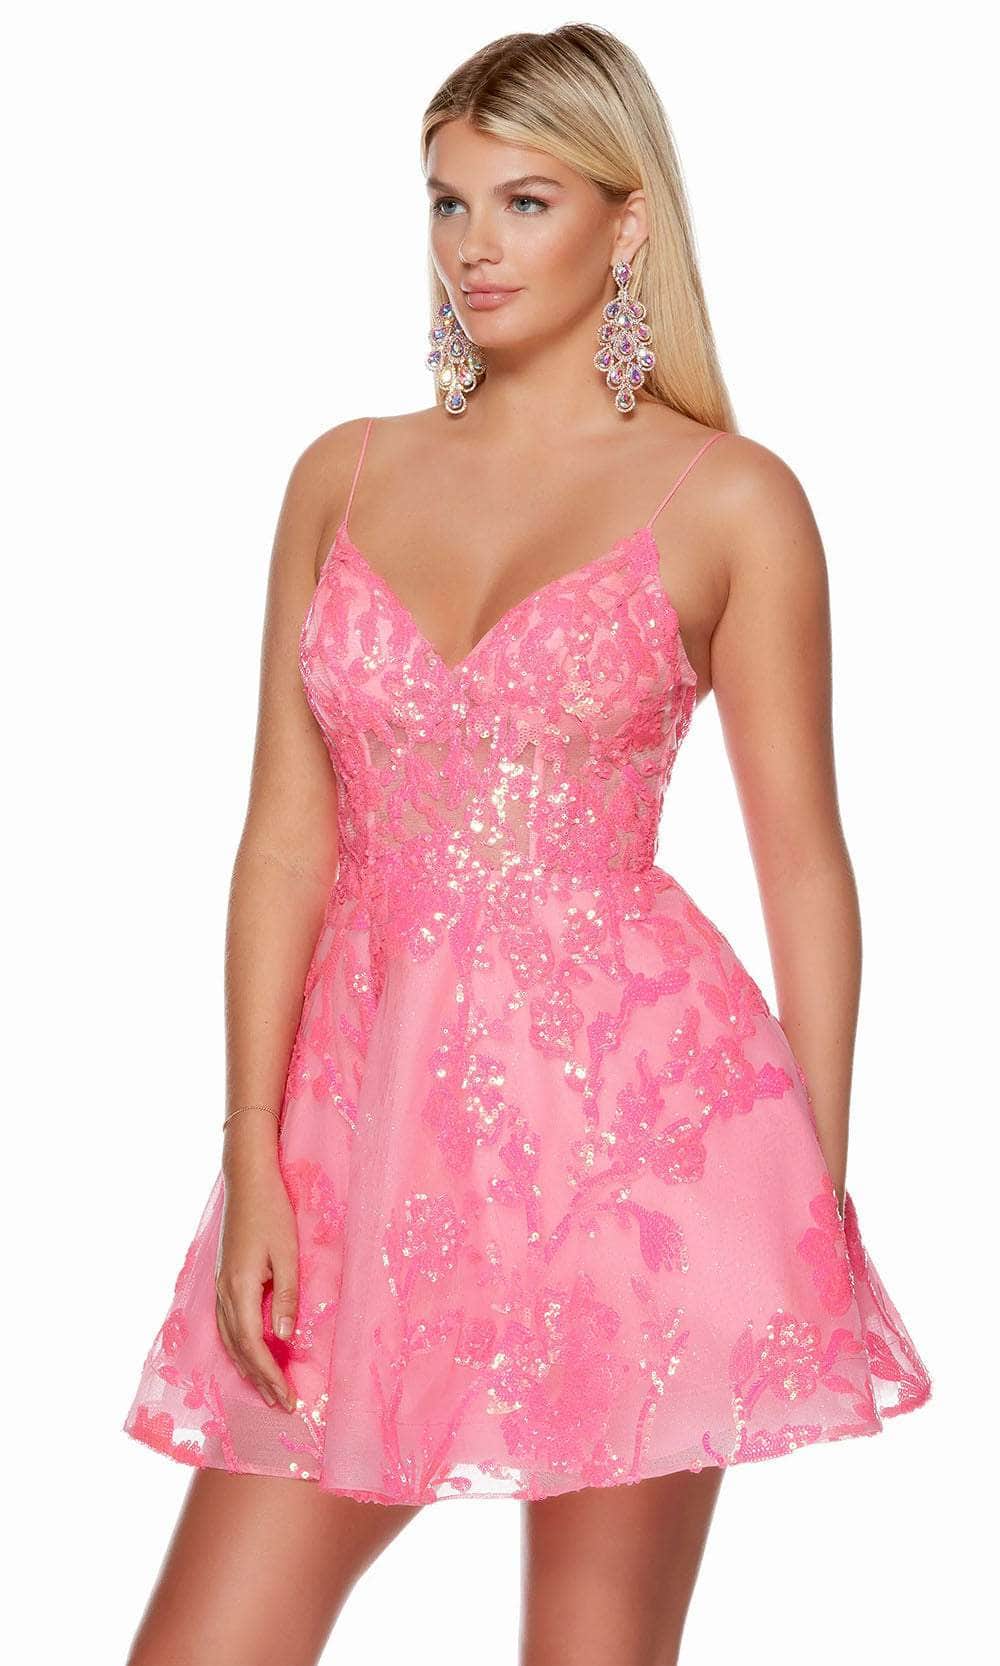 Alyce Paris 3138 - Sequin A-Line Homecoming Dress Special Occasion Dress 000 / Neon Pink